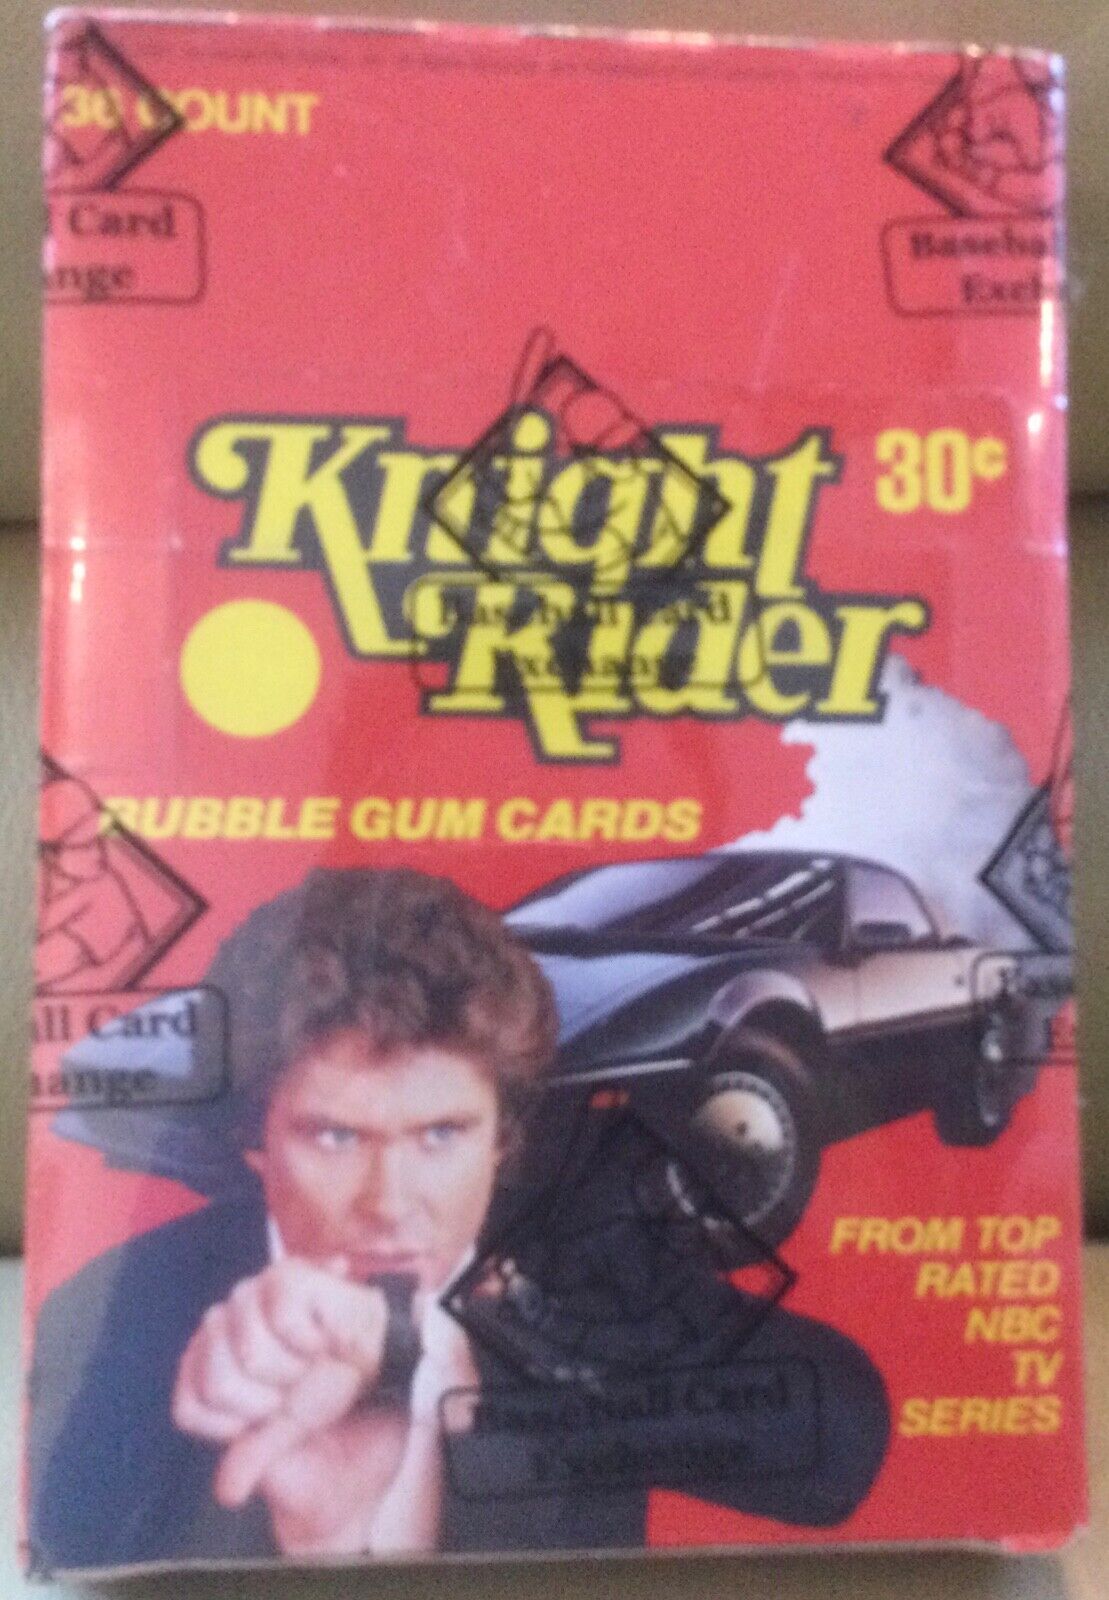 1983 Donruss - Knight Rider Wax Pack Box - BBCE Authenticated - Top Condition